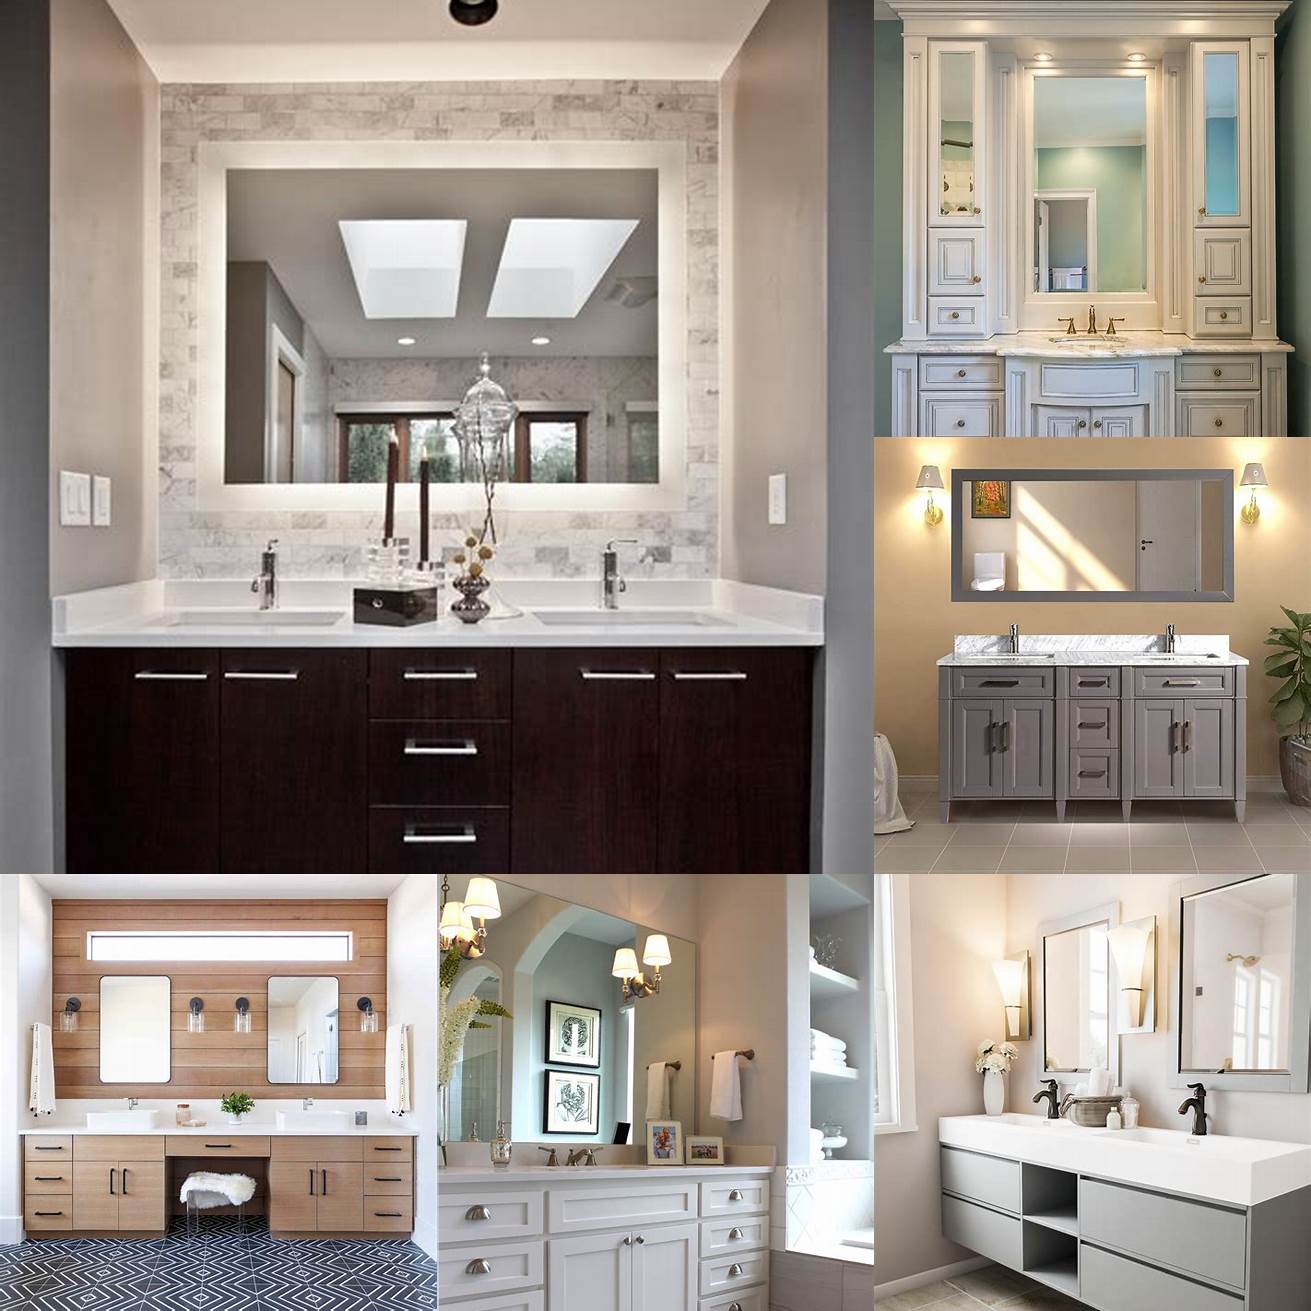 Style Make sure the style of the vanity fits with the overall look of your bathroom